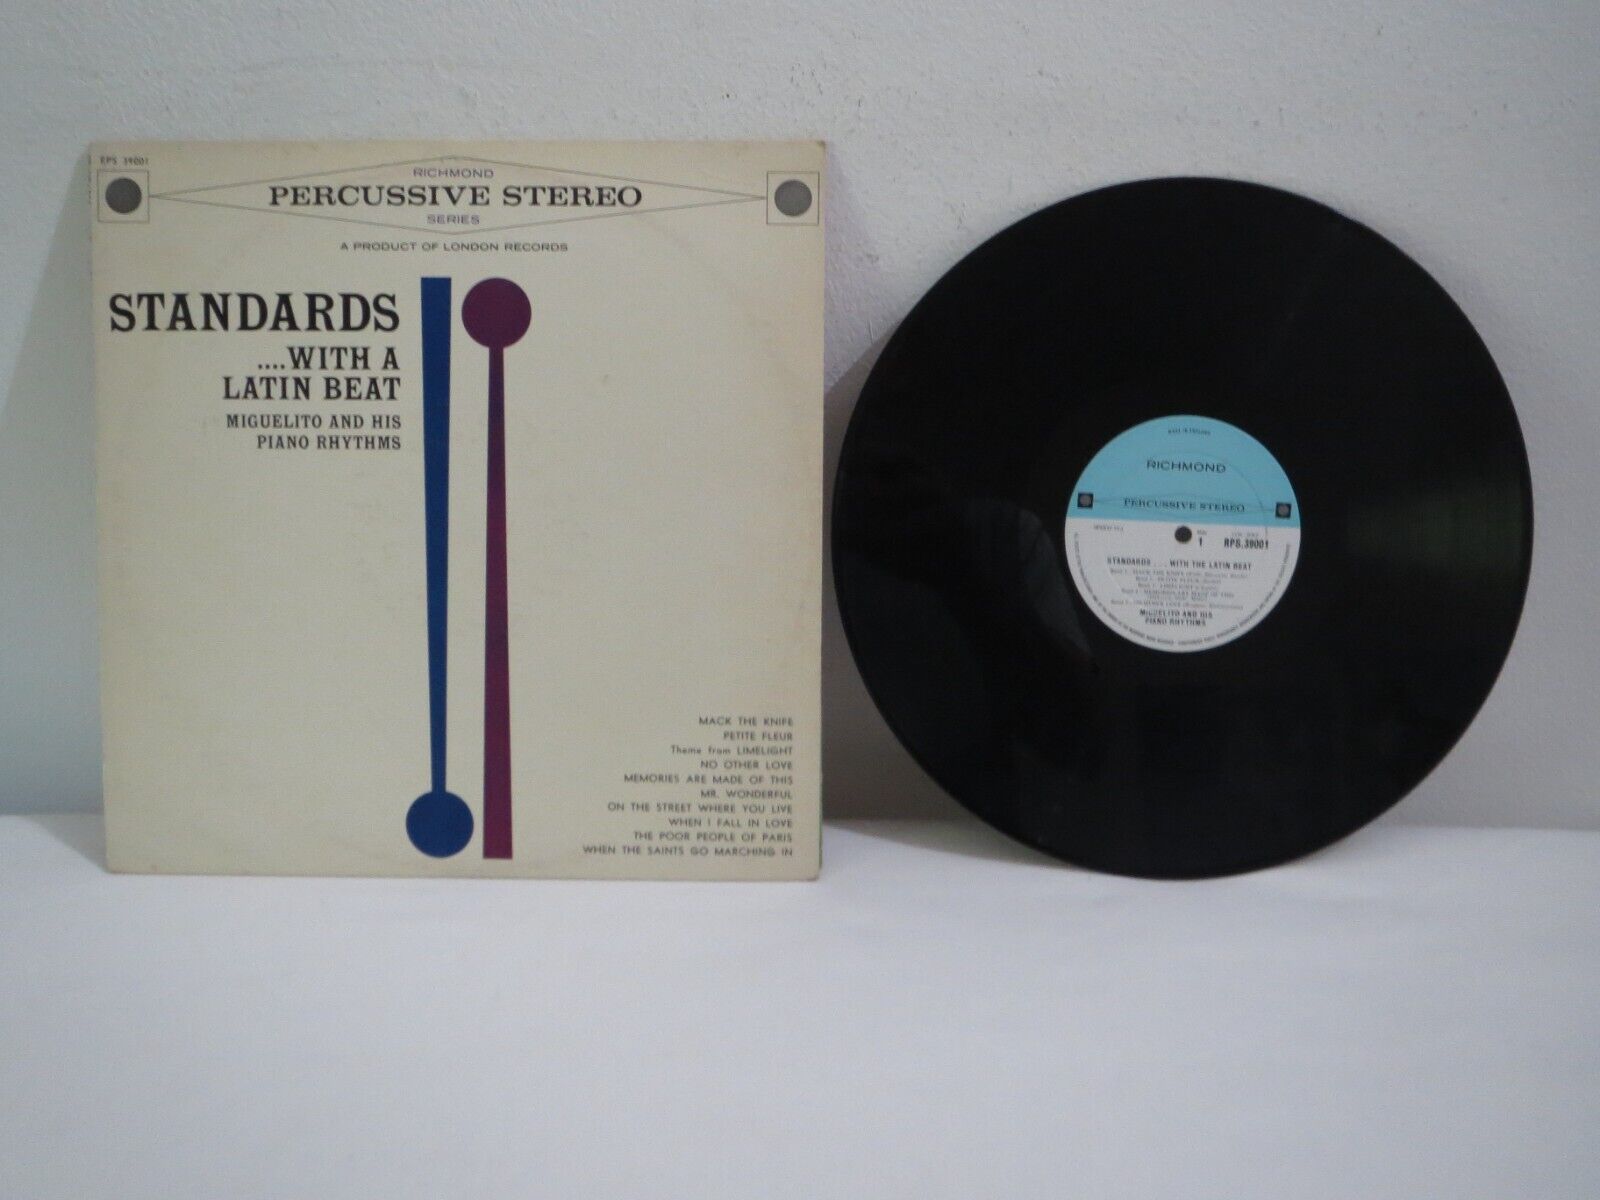 Miguelito And His Piano Rhythm Standards With A Latin Beat Vinyl LP Record Album